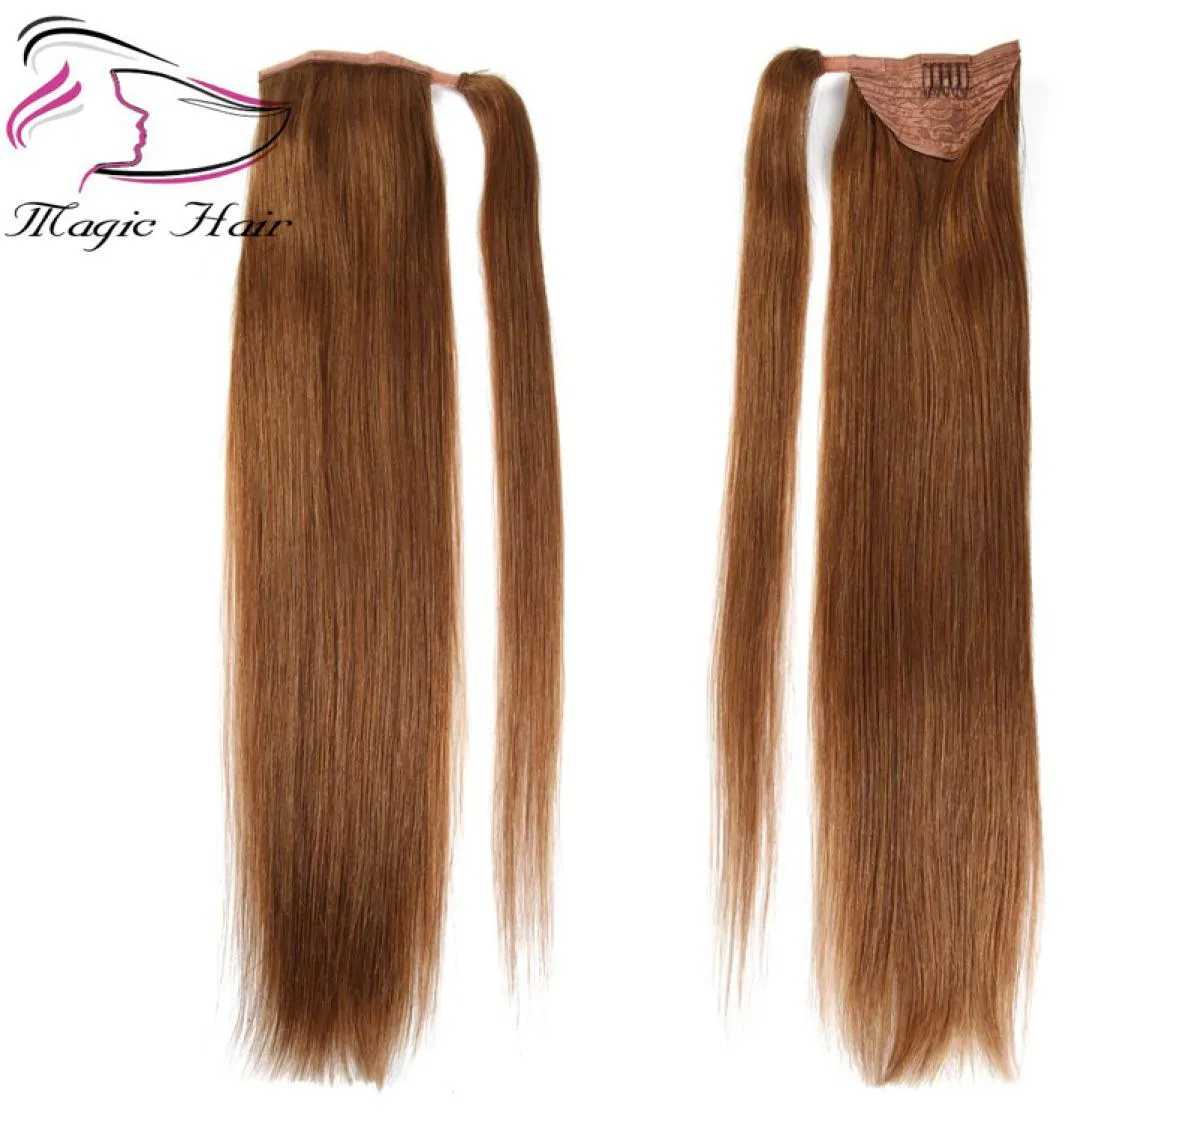 Evermagic Ponytail Human Hair Remy Straight European Ponytail Frisyr 70G 100 Natural Hair Clip in Extensions4480903